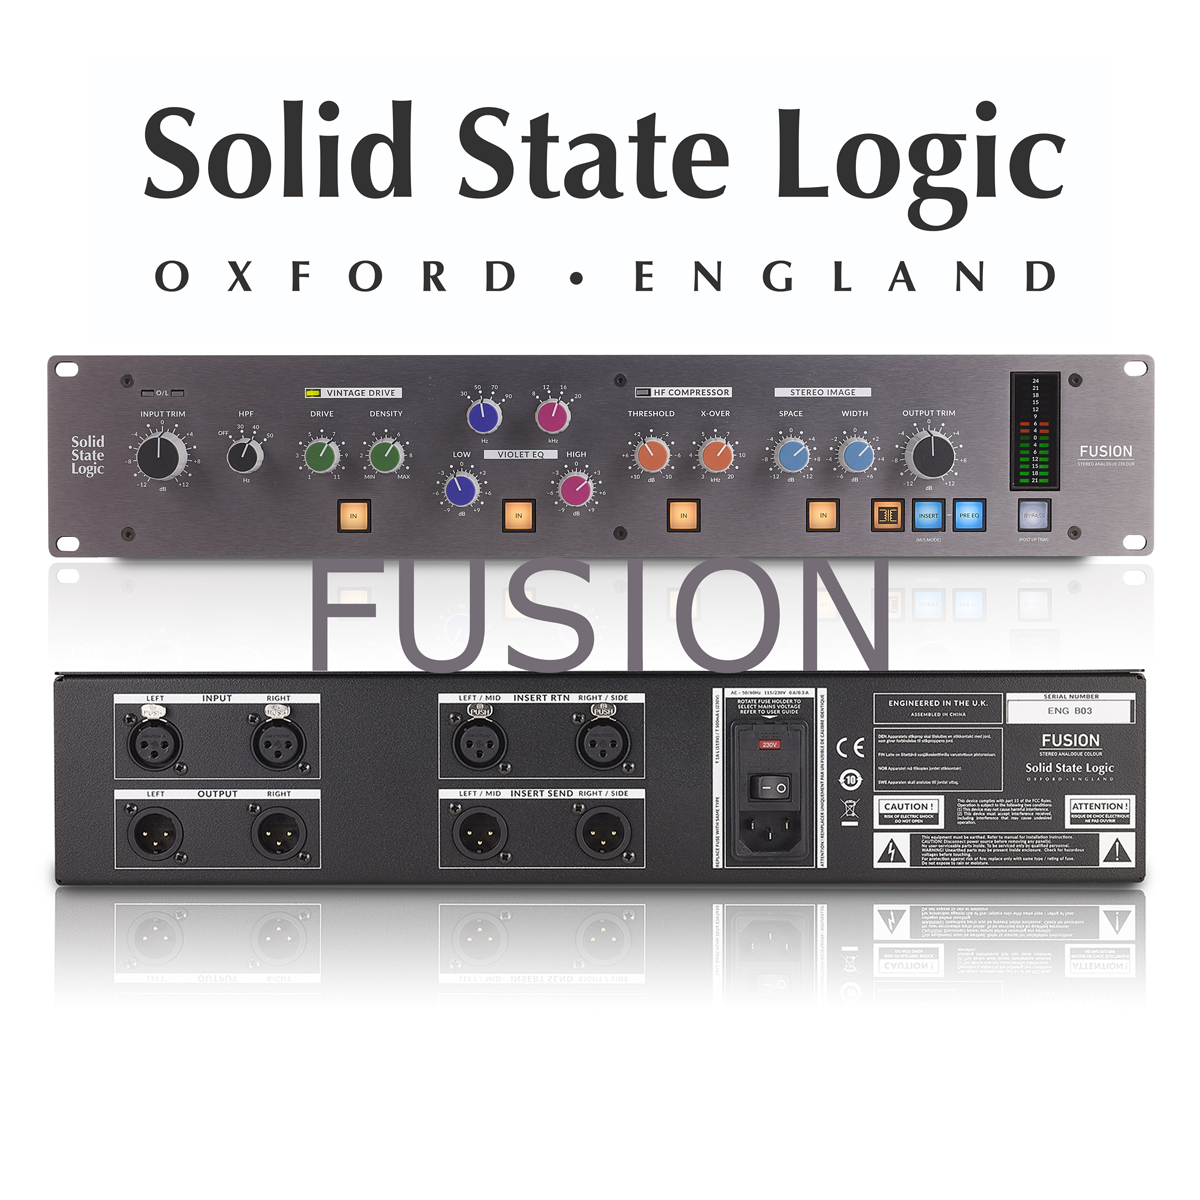 SSL News - Meet the newly launched "Fusion"